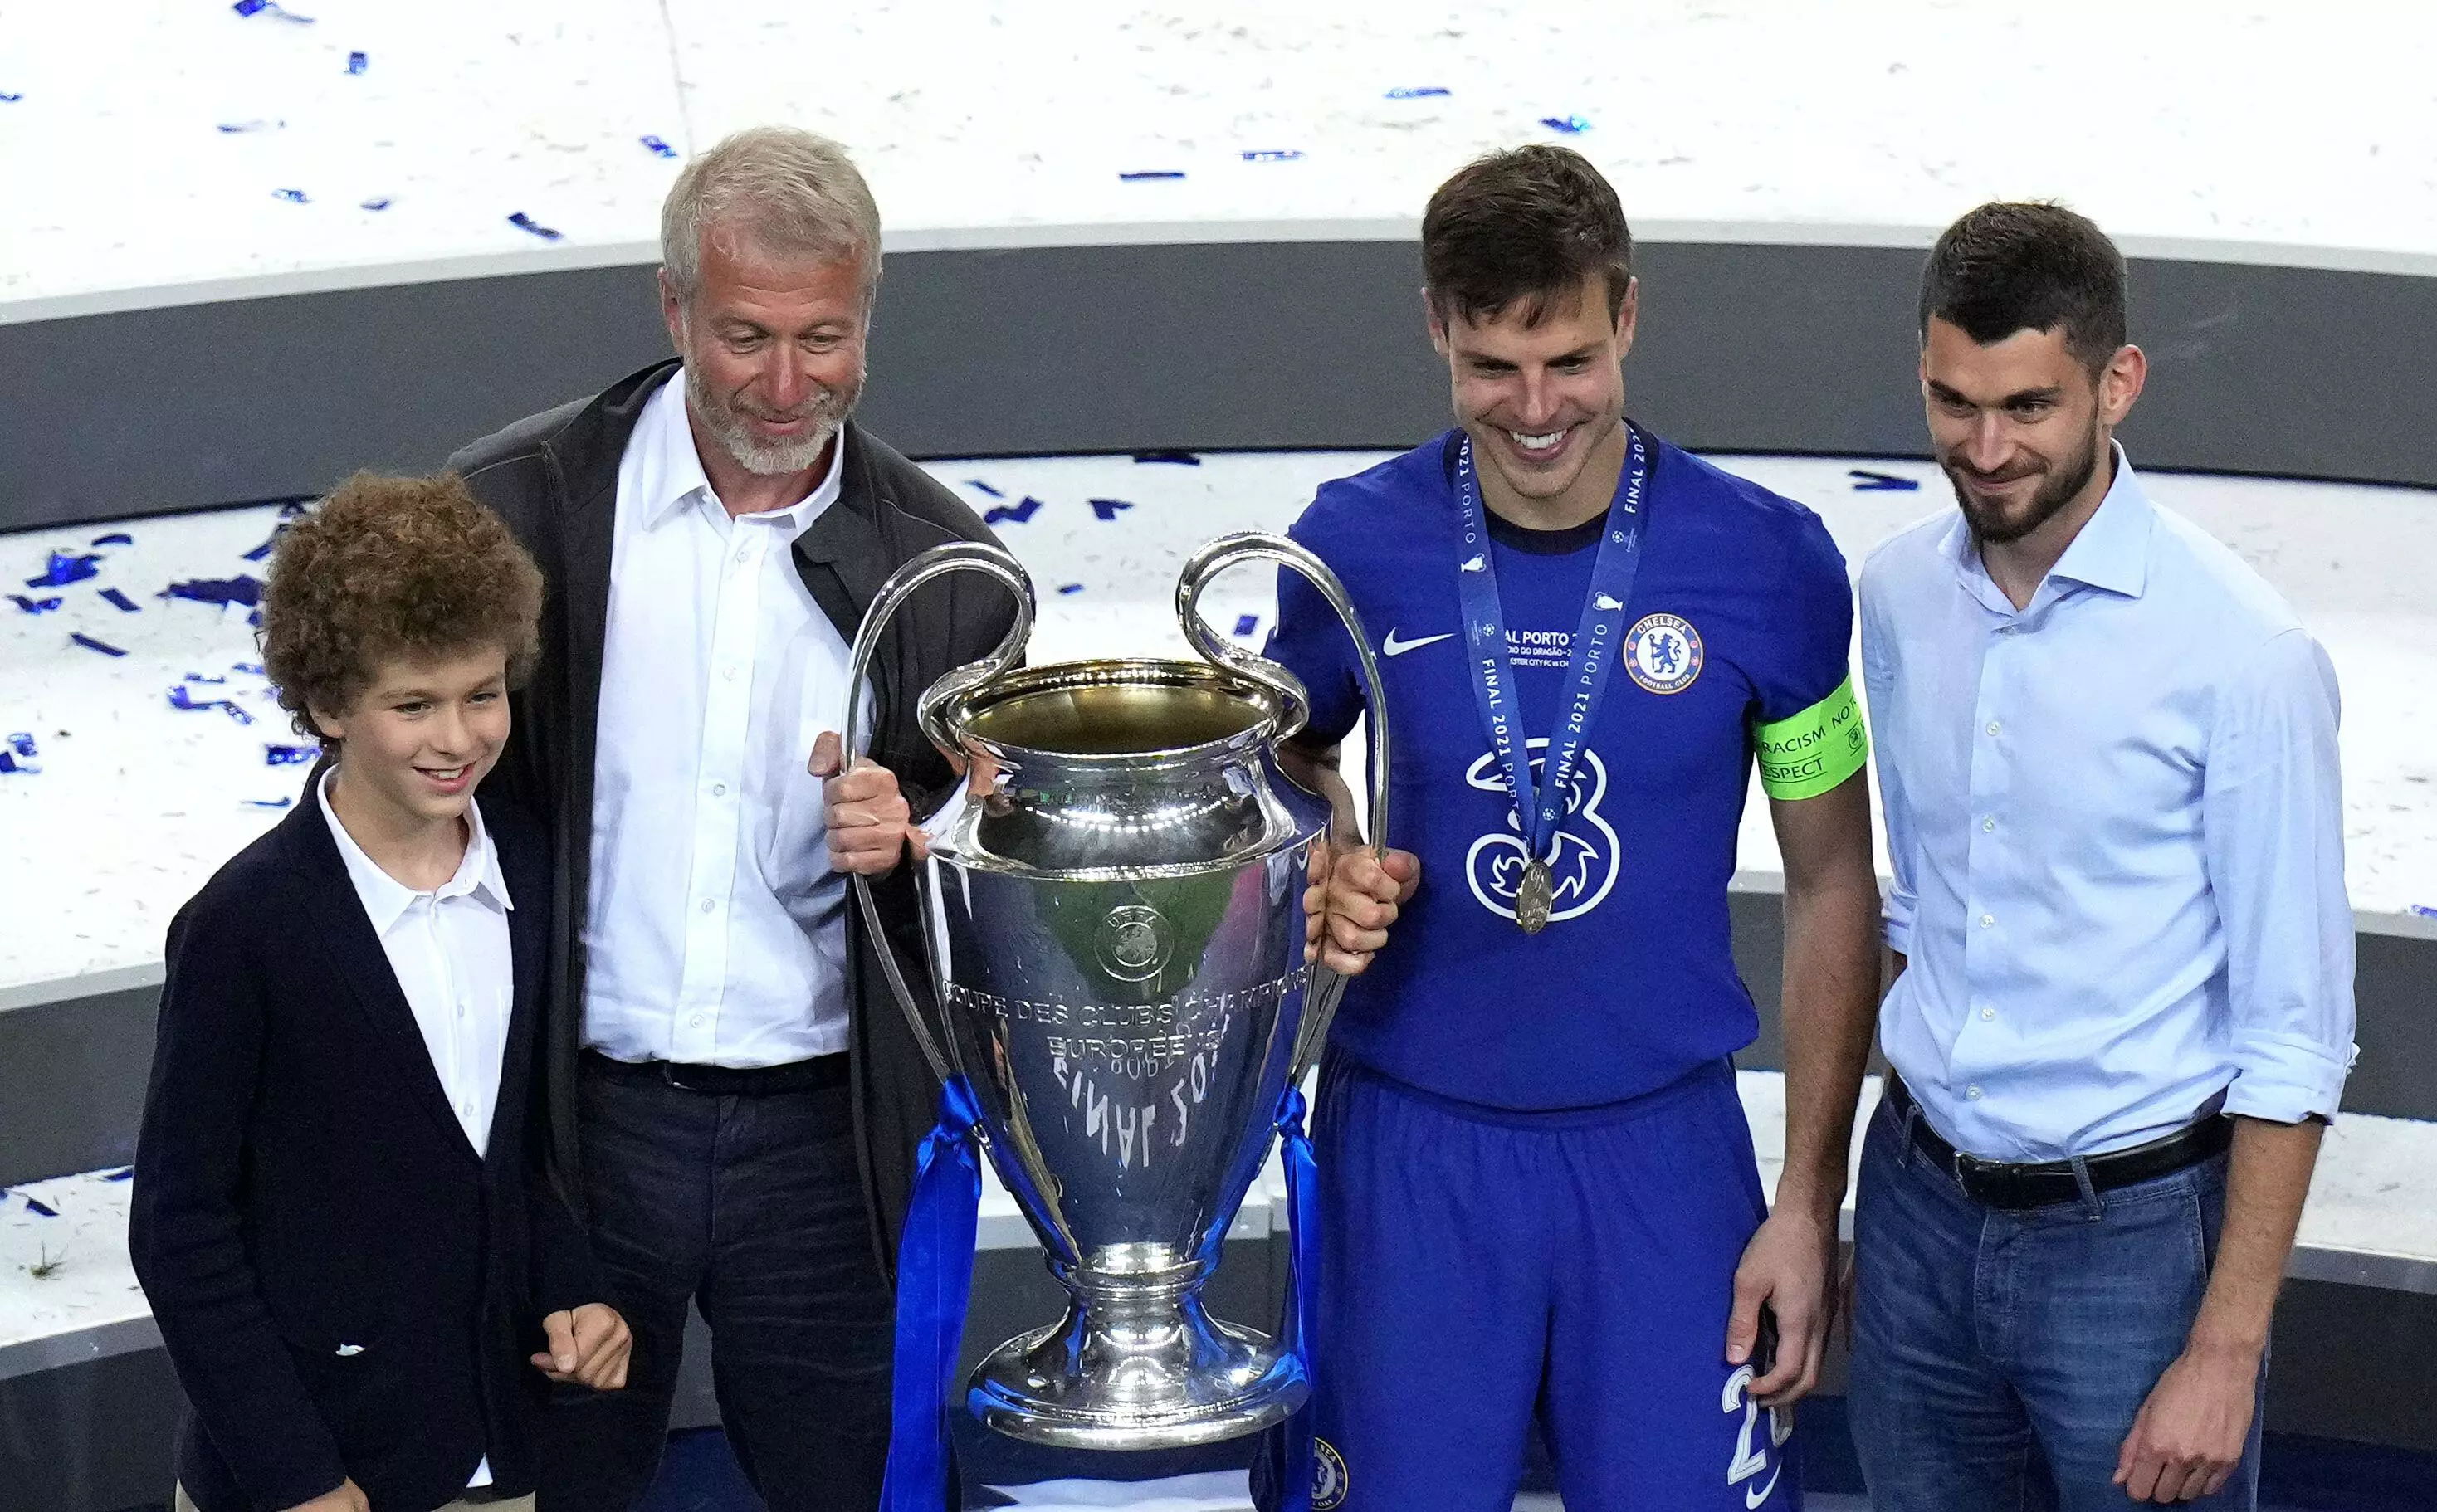 Abramovich with the Champions League trophy last year. Image: PA Images